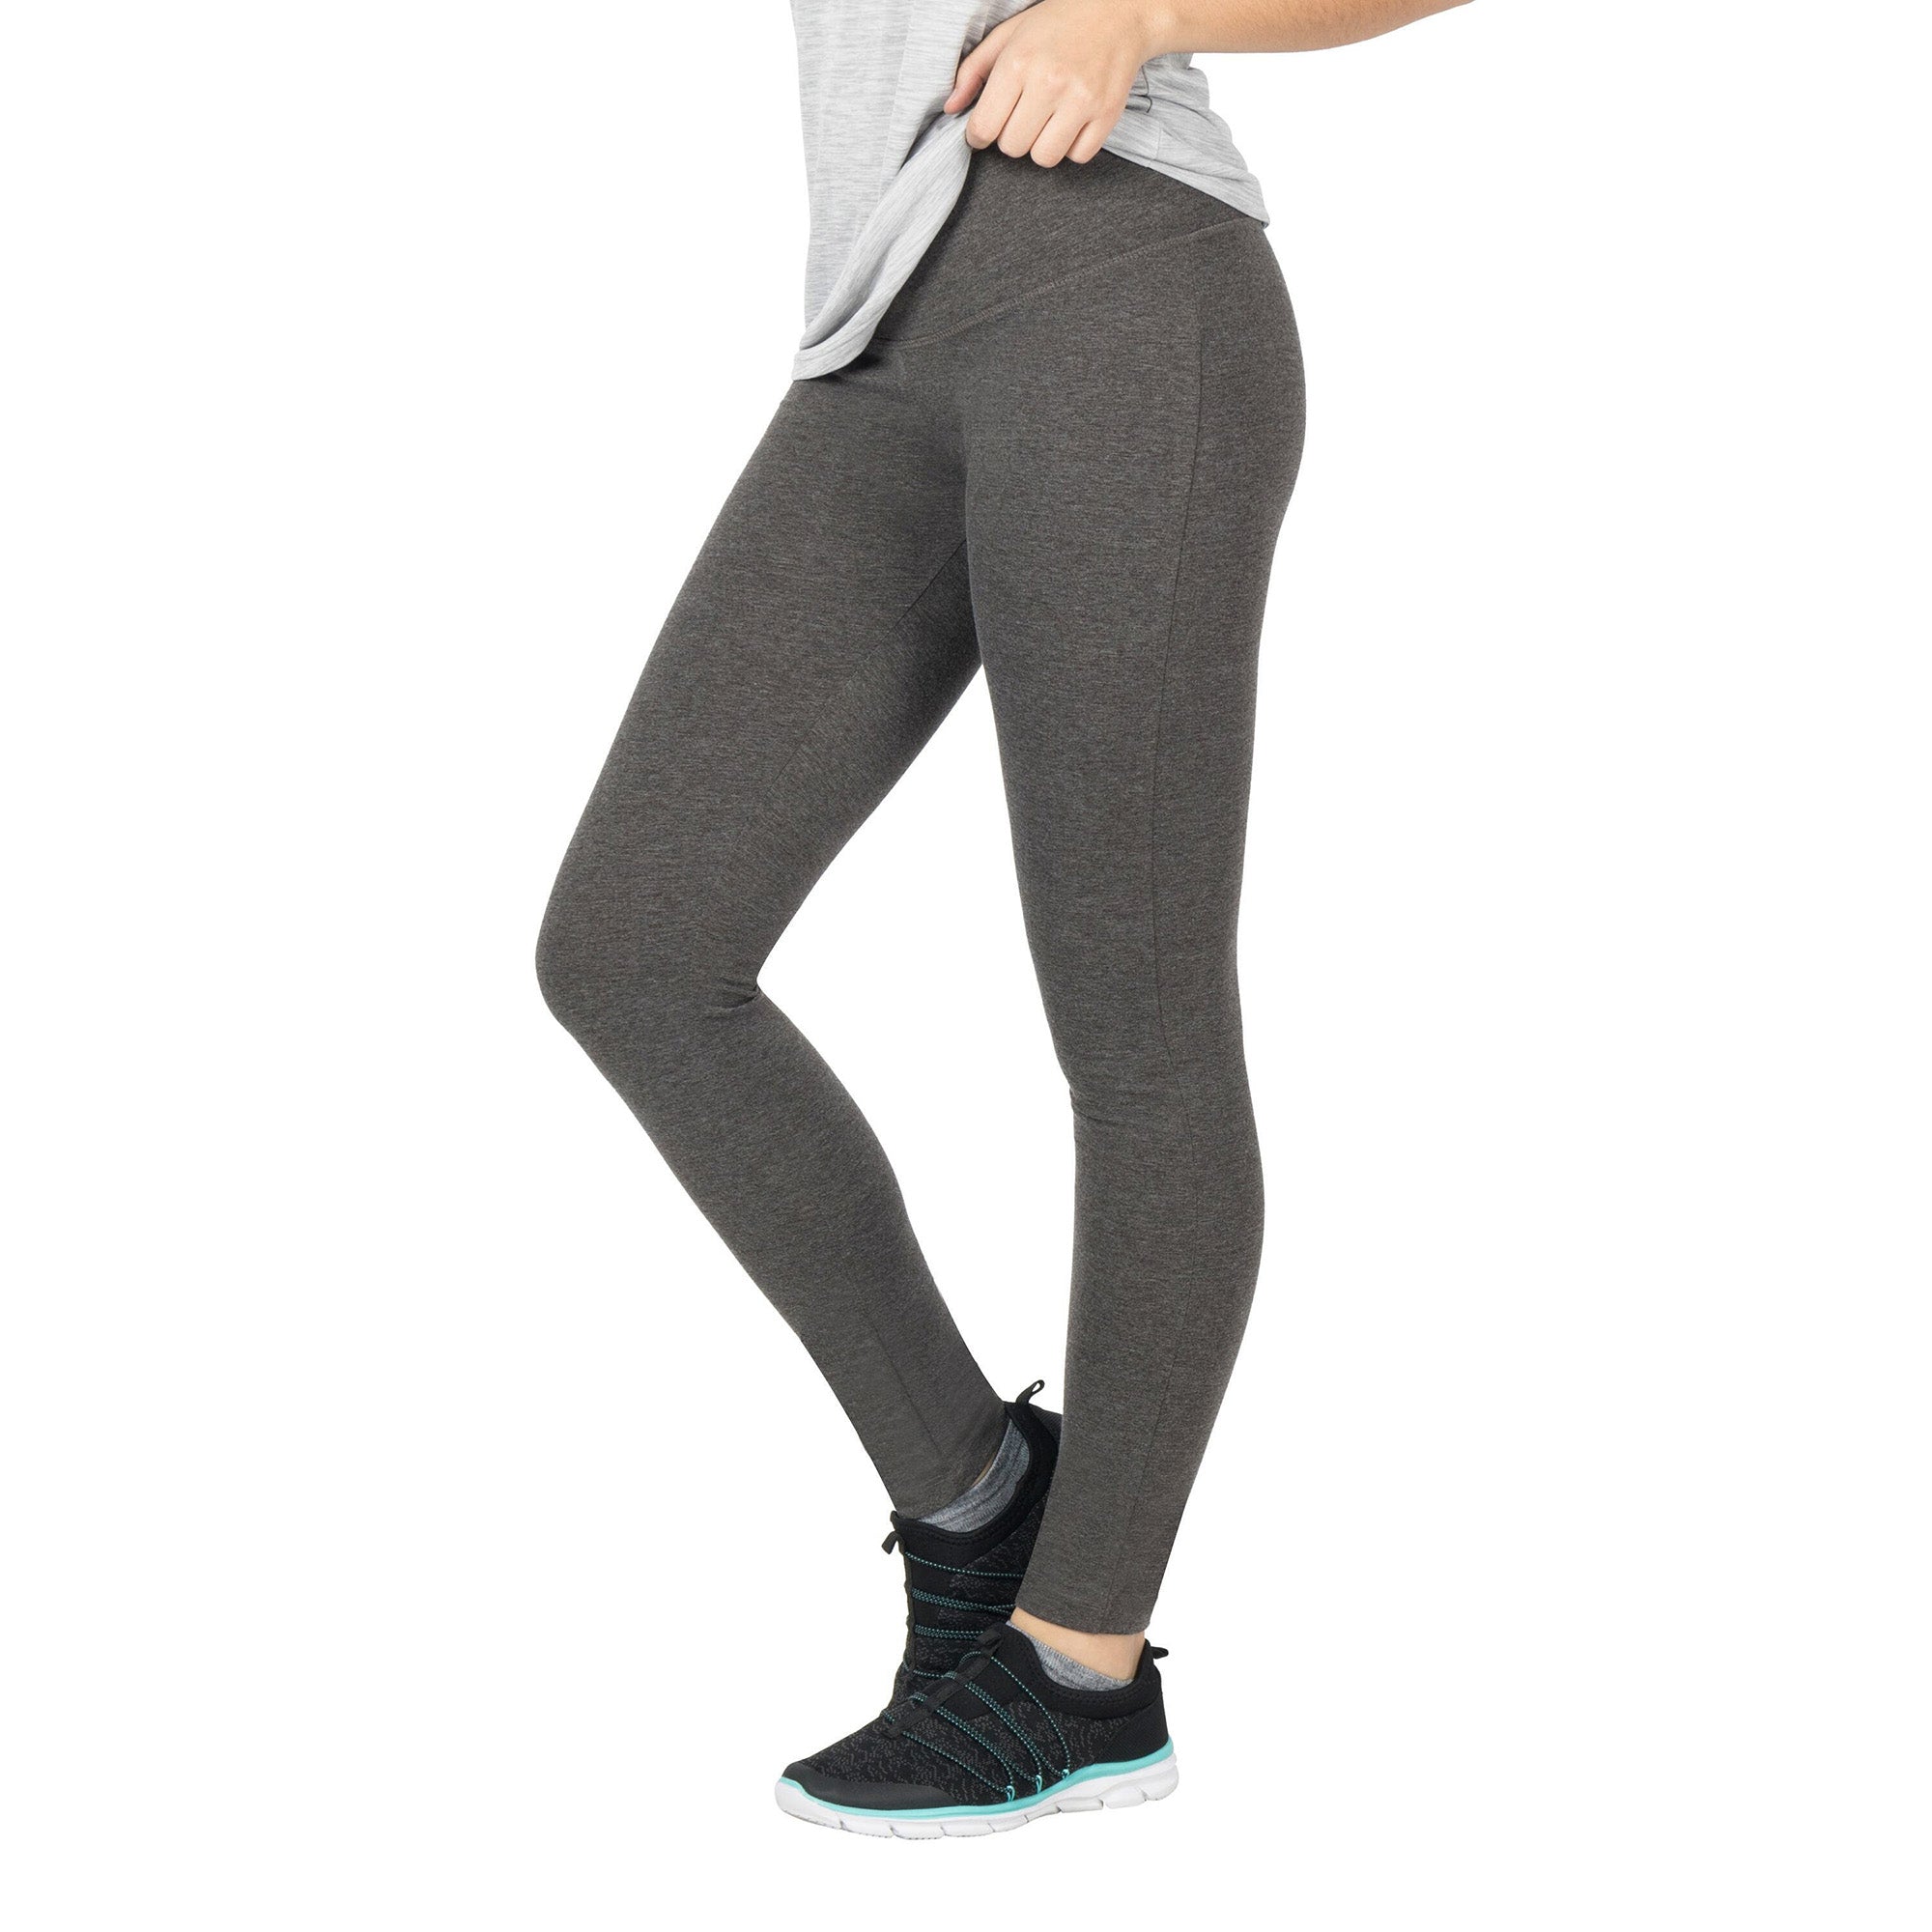 ACX Active Women's Mid-Rise Yoga Leggings with Comfort Waistband